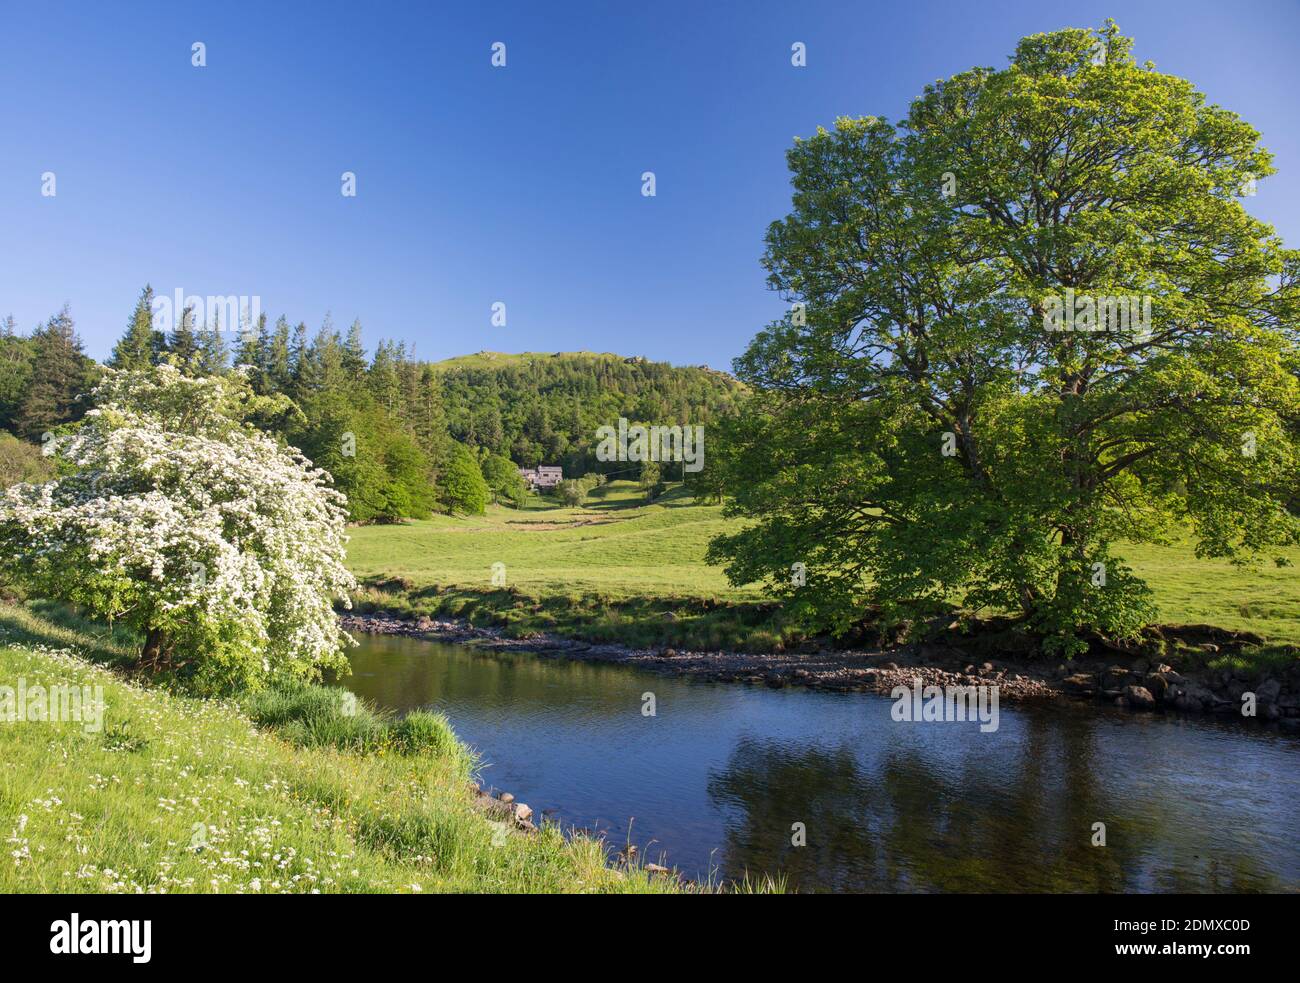 Elterwater, Cumbria, England. View across the tranquil River Brathay near Skelwith Bridge, spring. Stock Photo